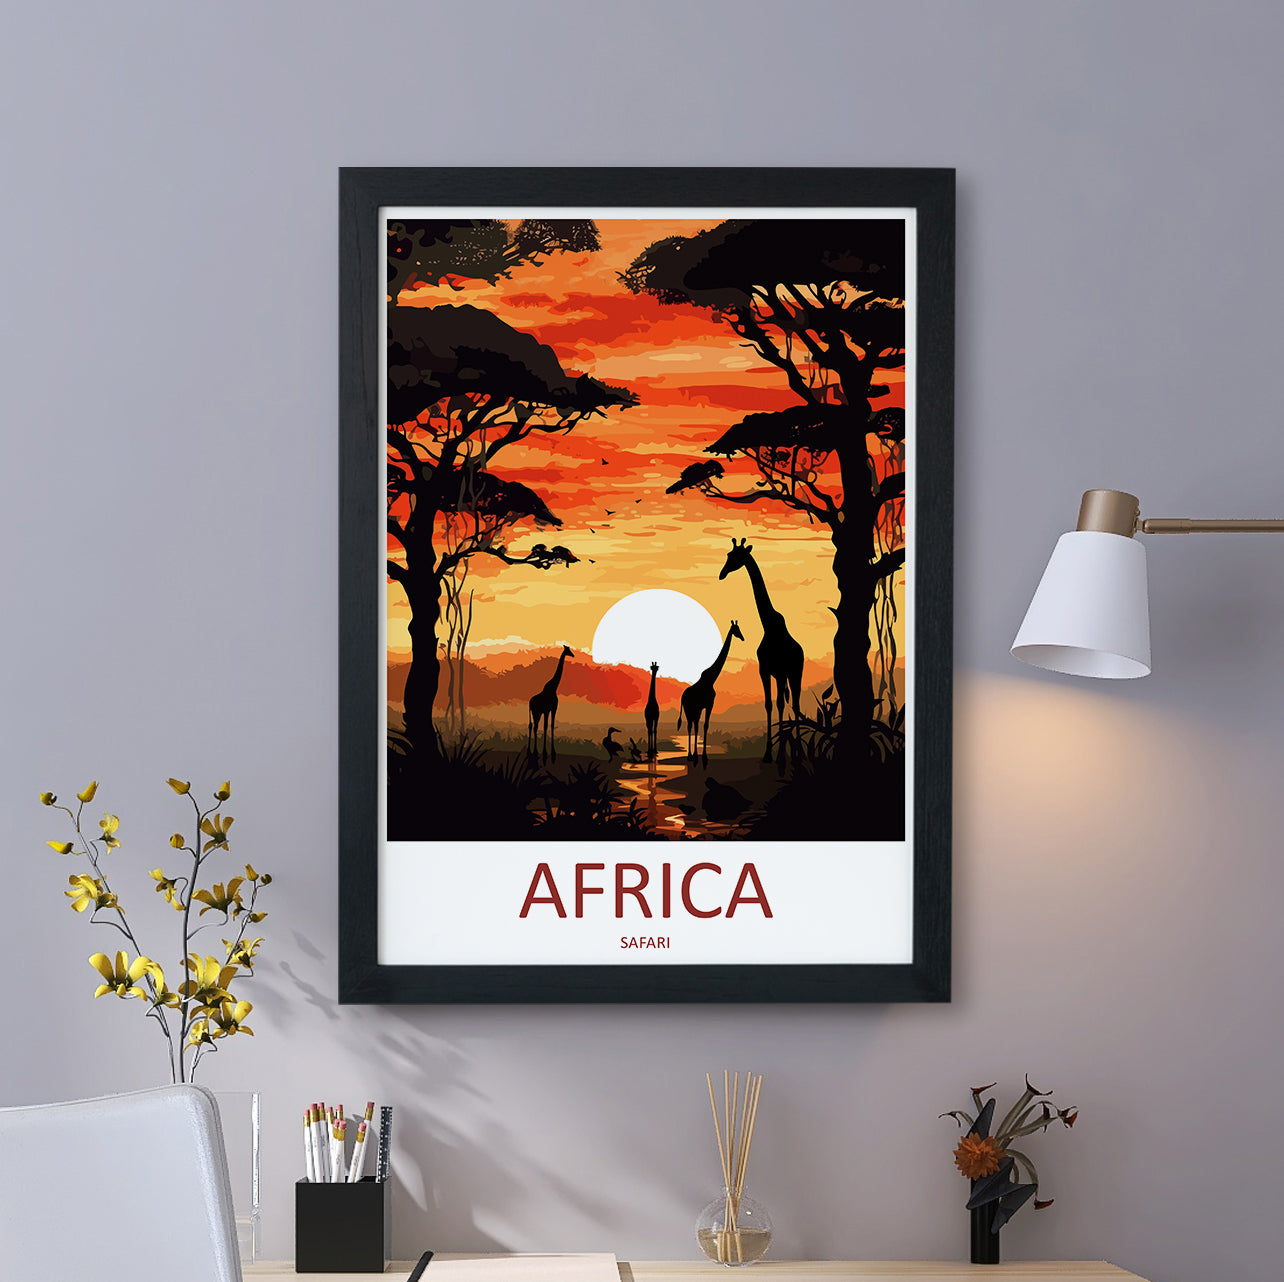 Africa Travel Posters